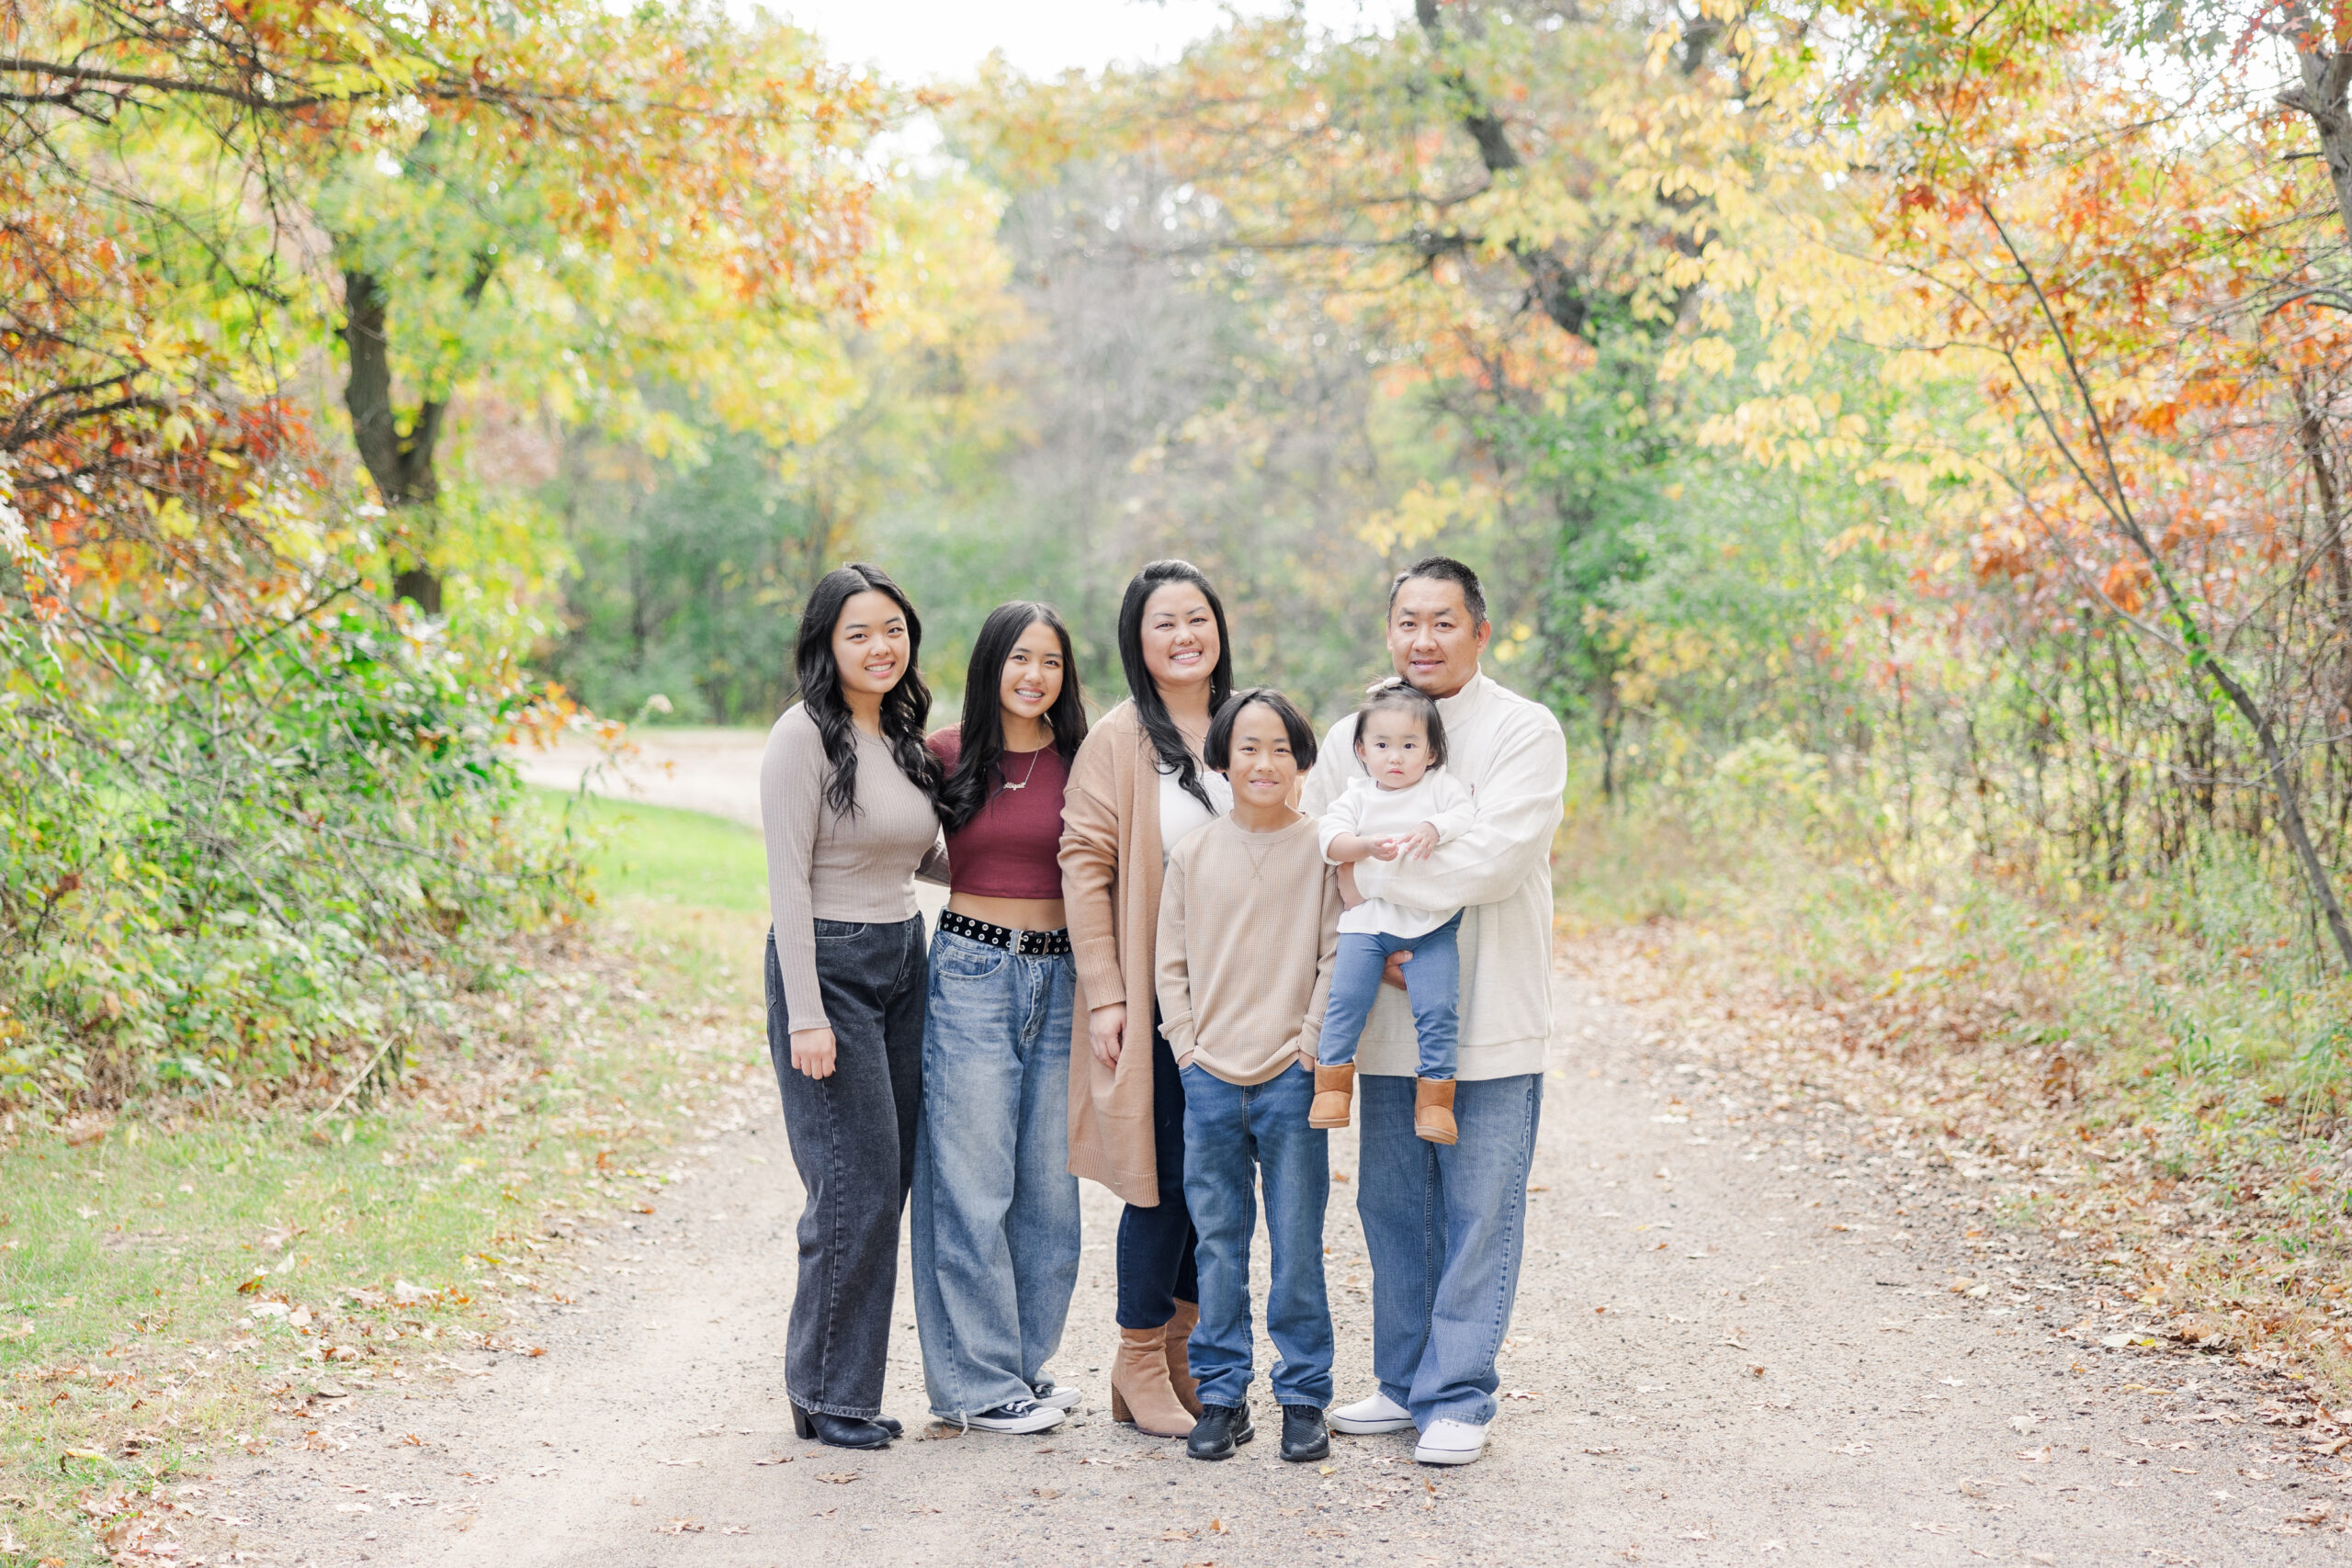 Bunker Hills Activity Center Fall Family Portrait Session in Coon Rapids Minnesota